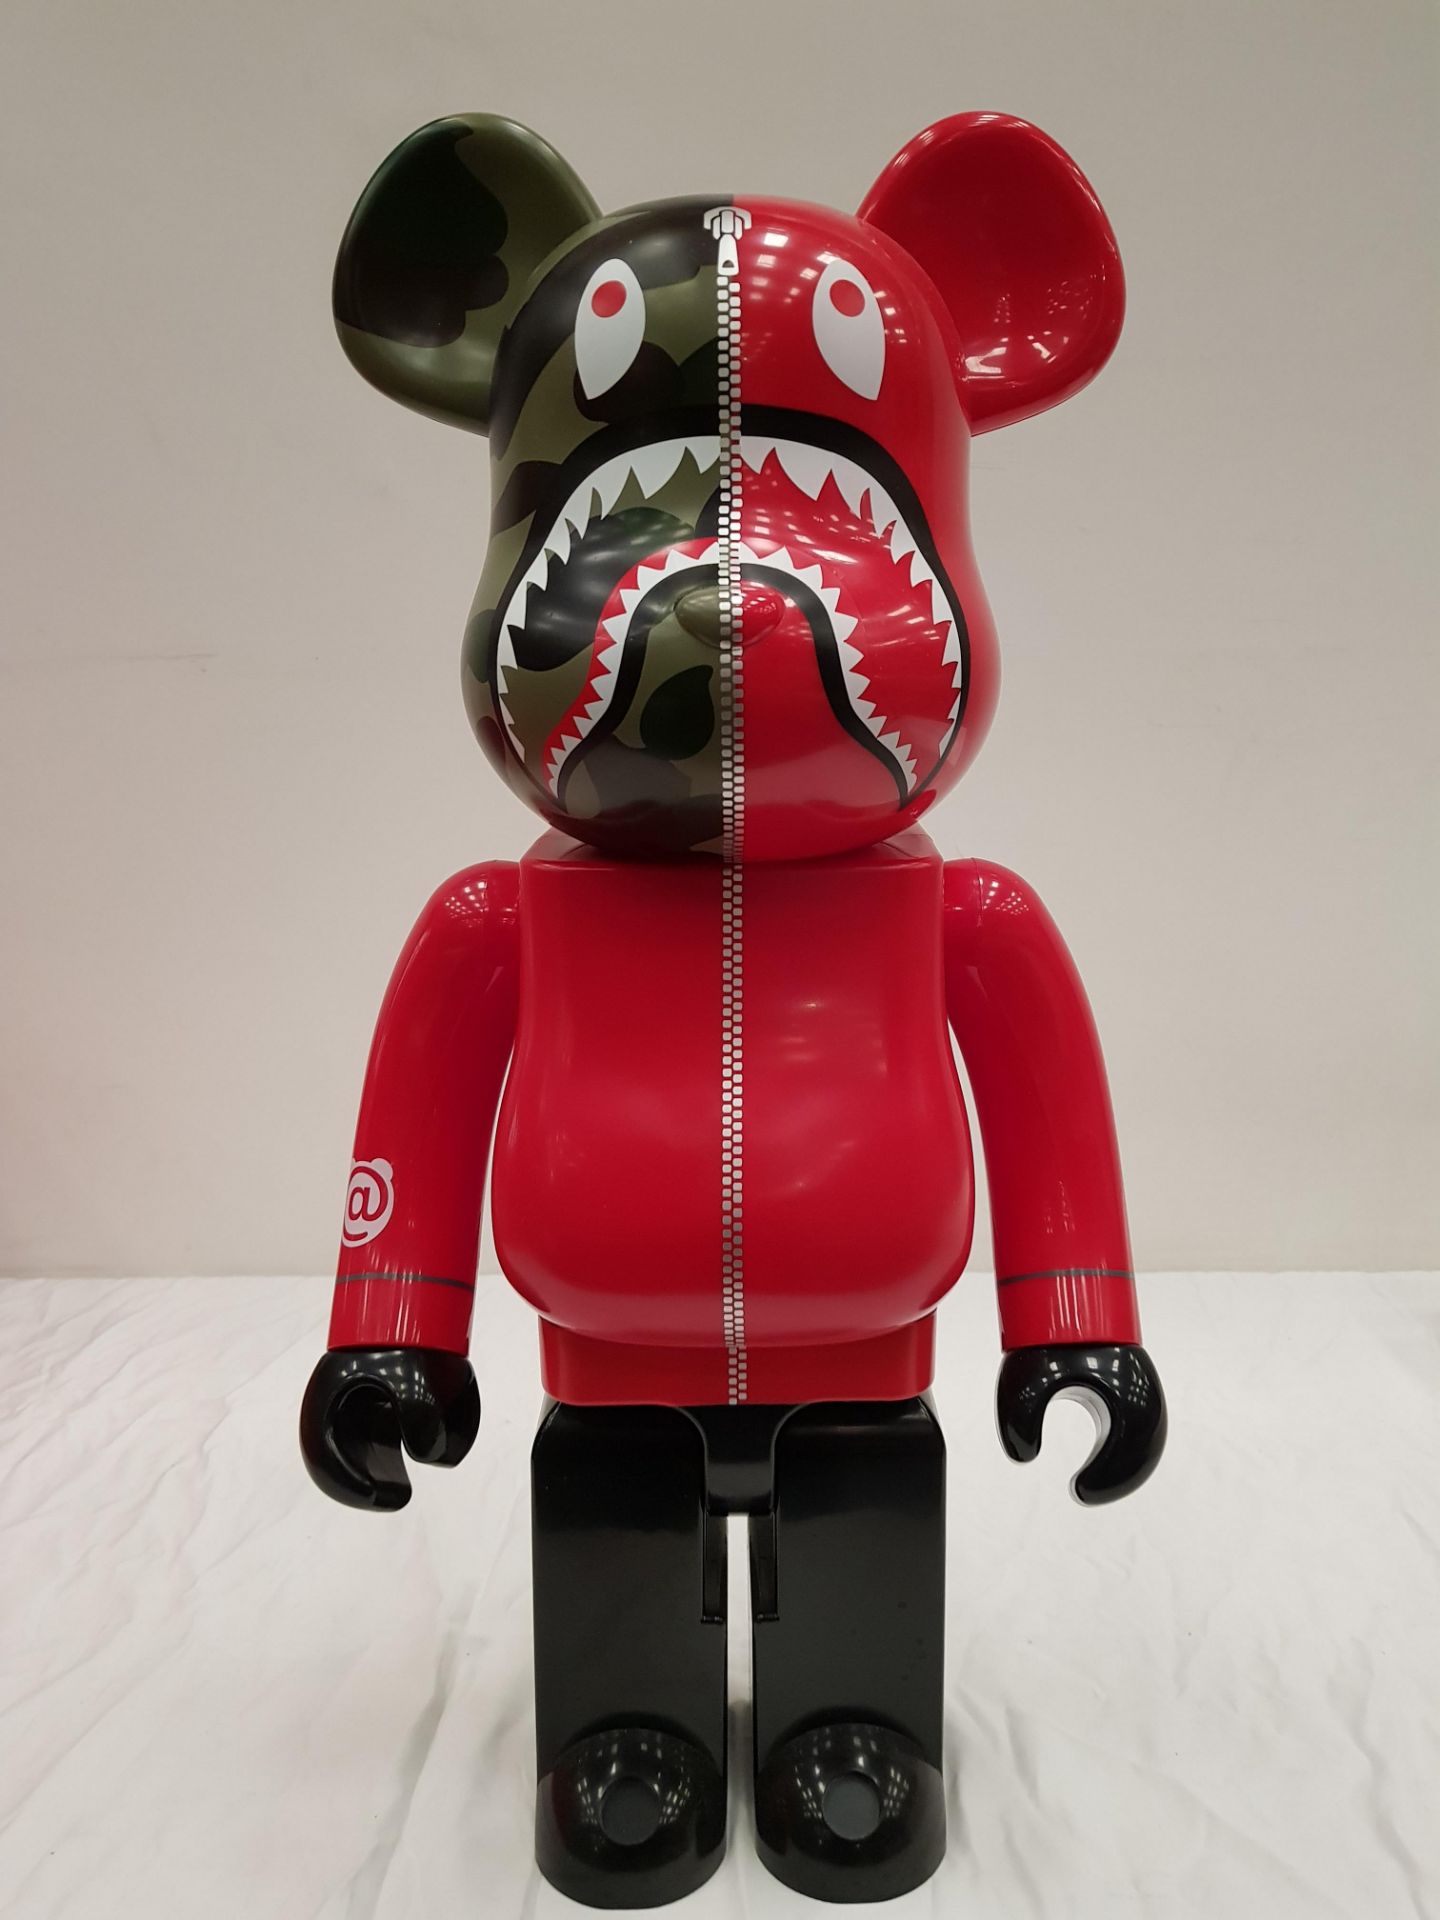 1 X BOXED BEARBRICK A BATHING APE 1ST CAMO SHARK RED 1000% - COLLECTABLE ART FIGURES - 70 CM HEIGHT - Image 2 of 4